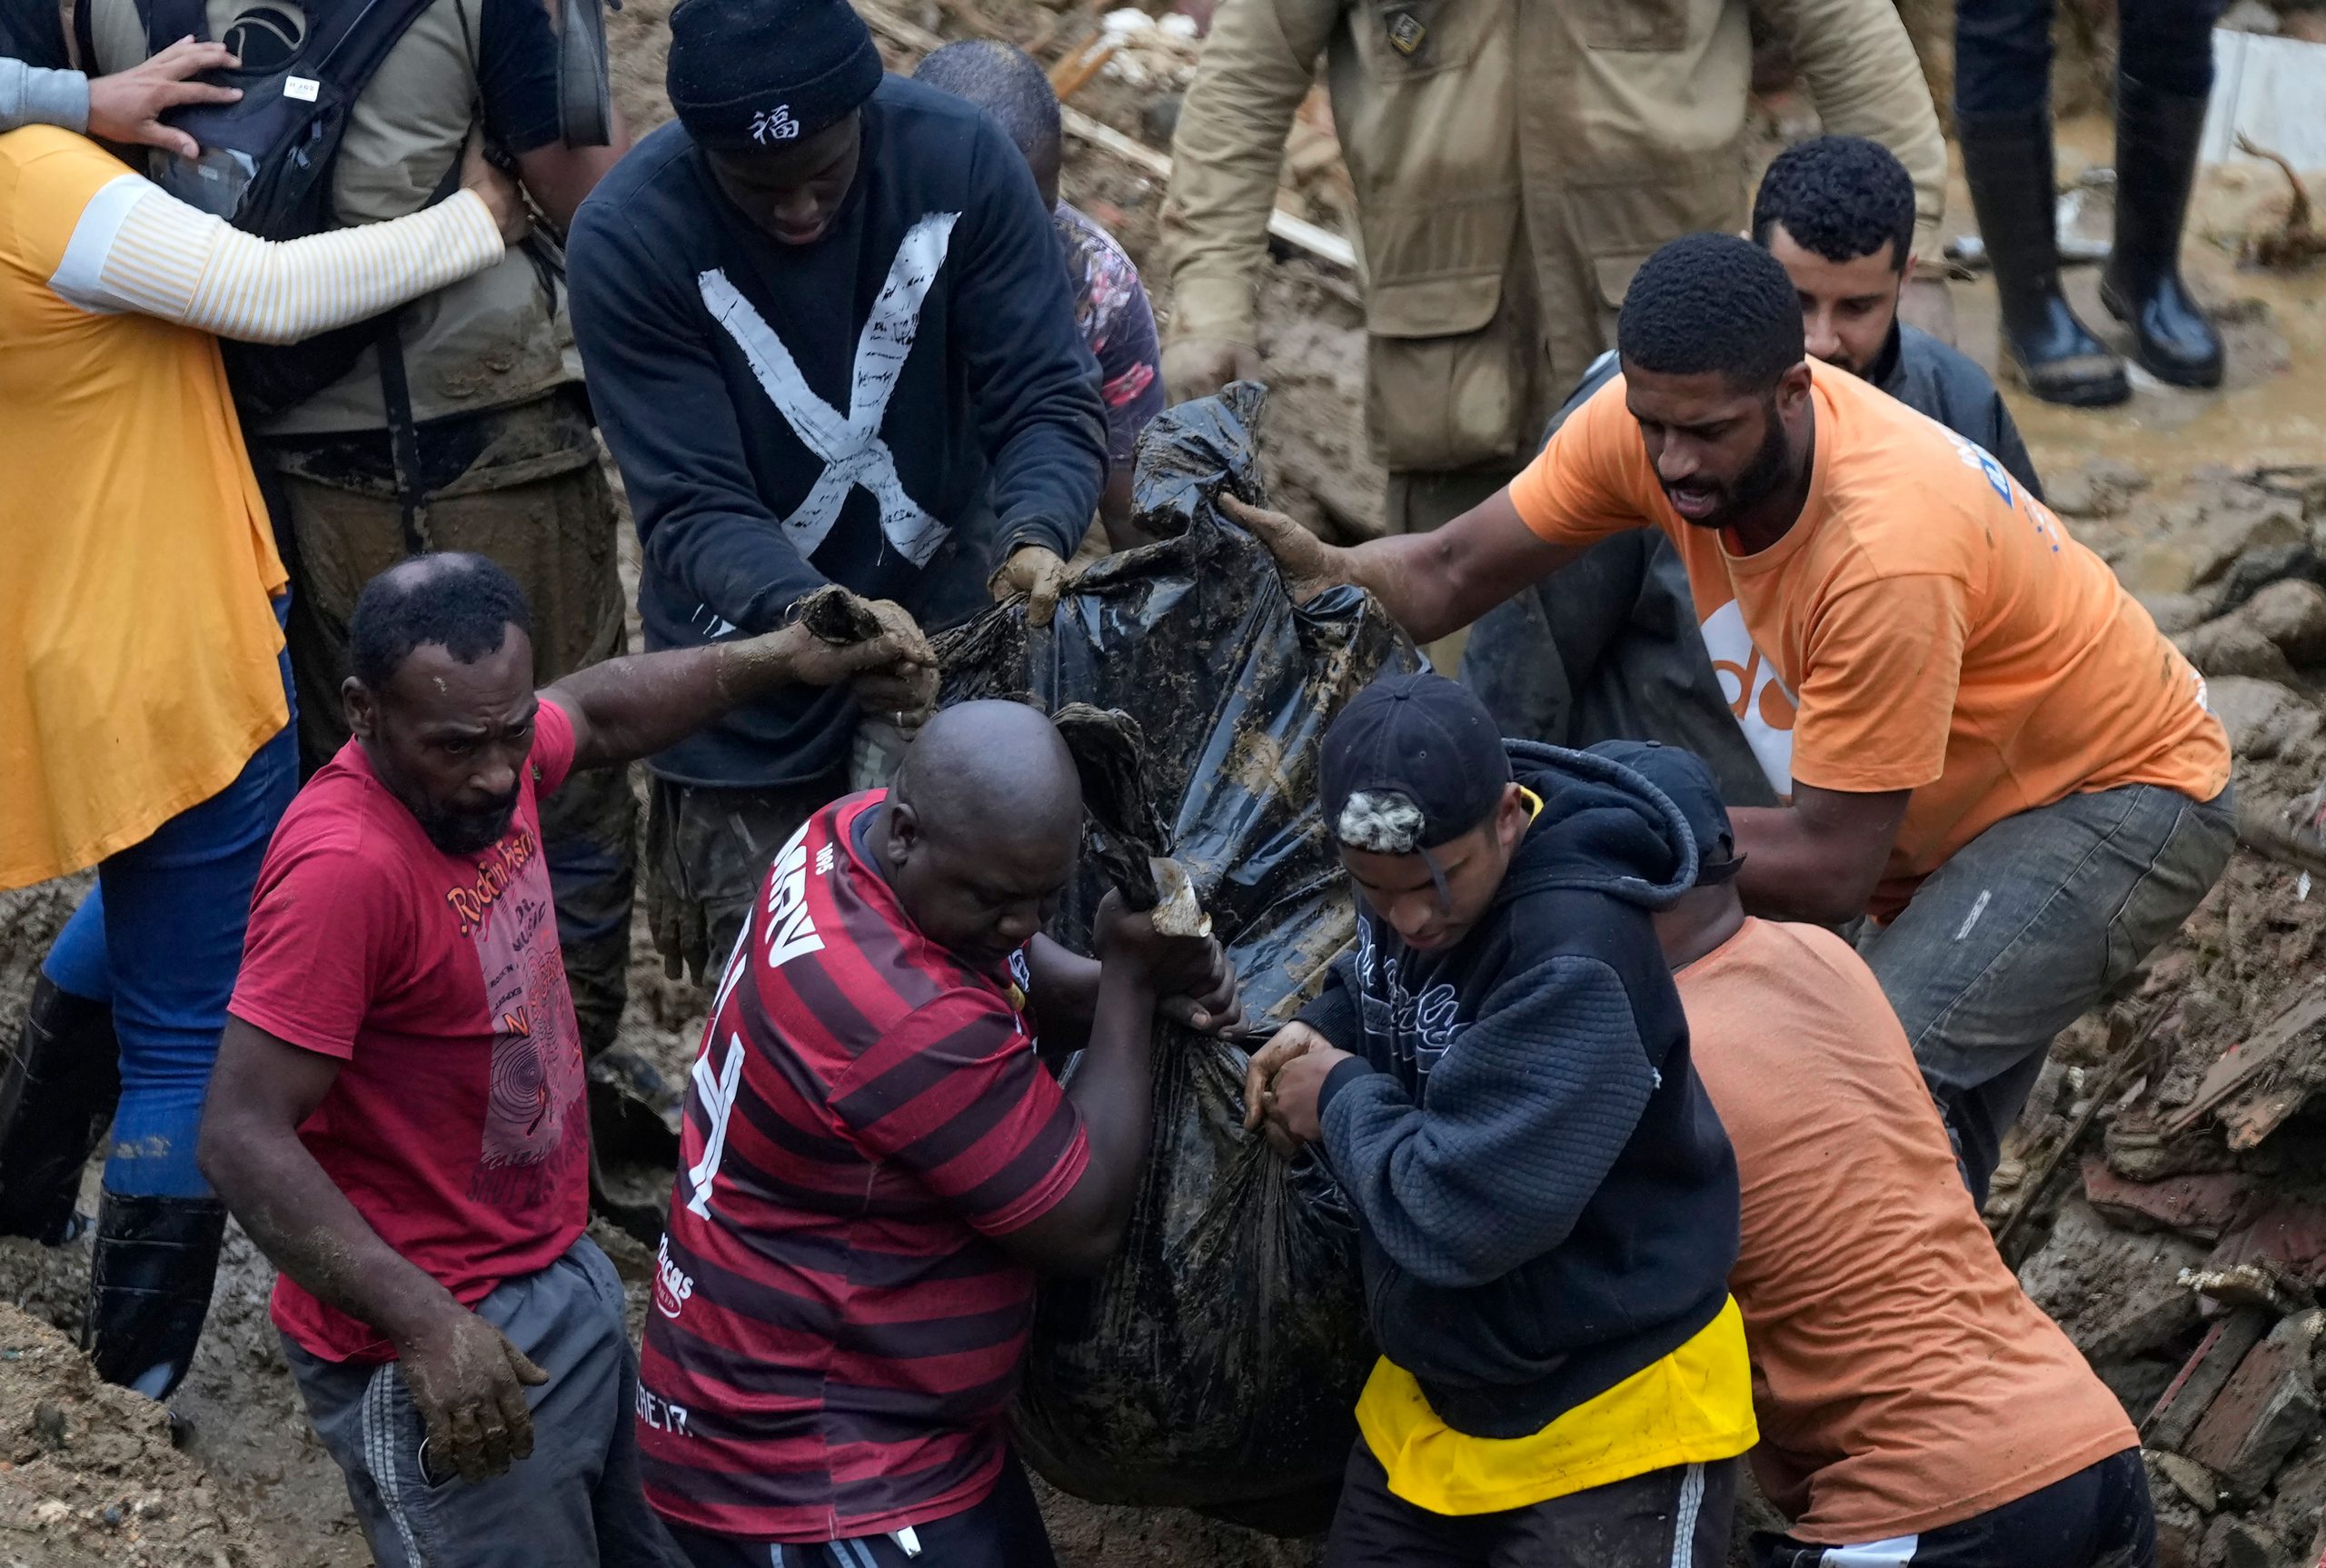 Death toll from mudslides, floods in Brazil reaches 105